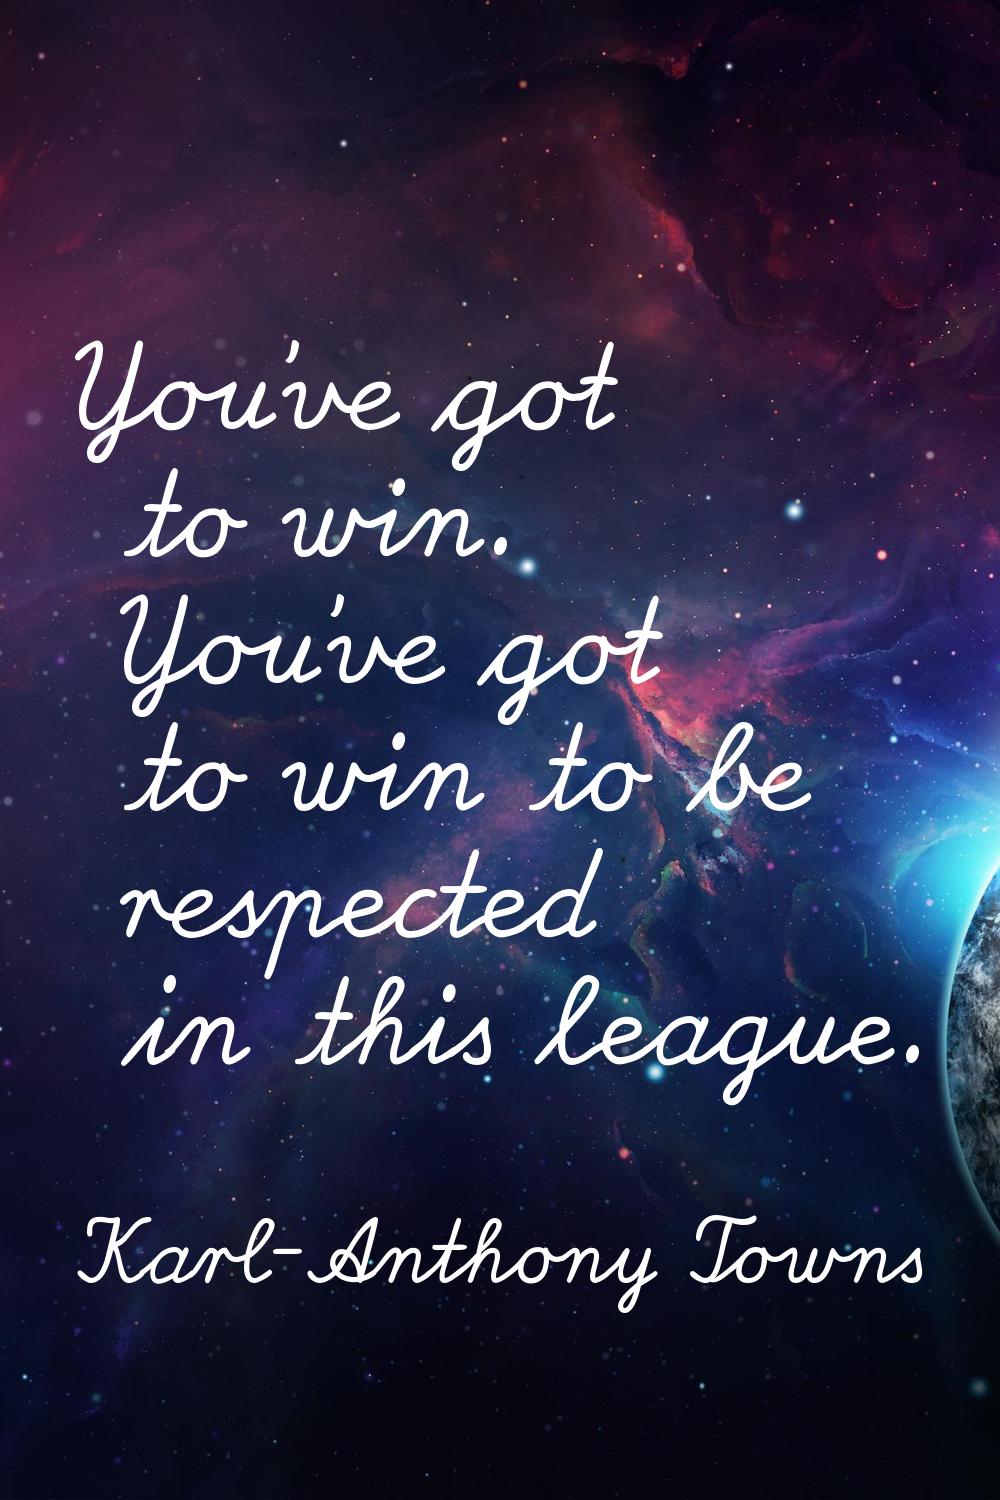 You've got to win. You've got to win to be respected in this league.